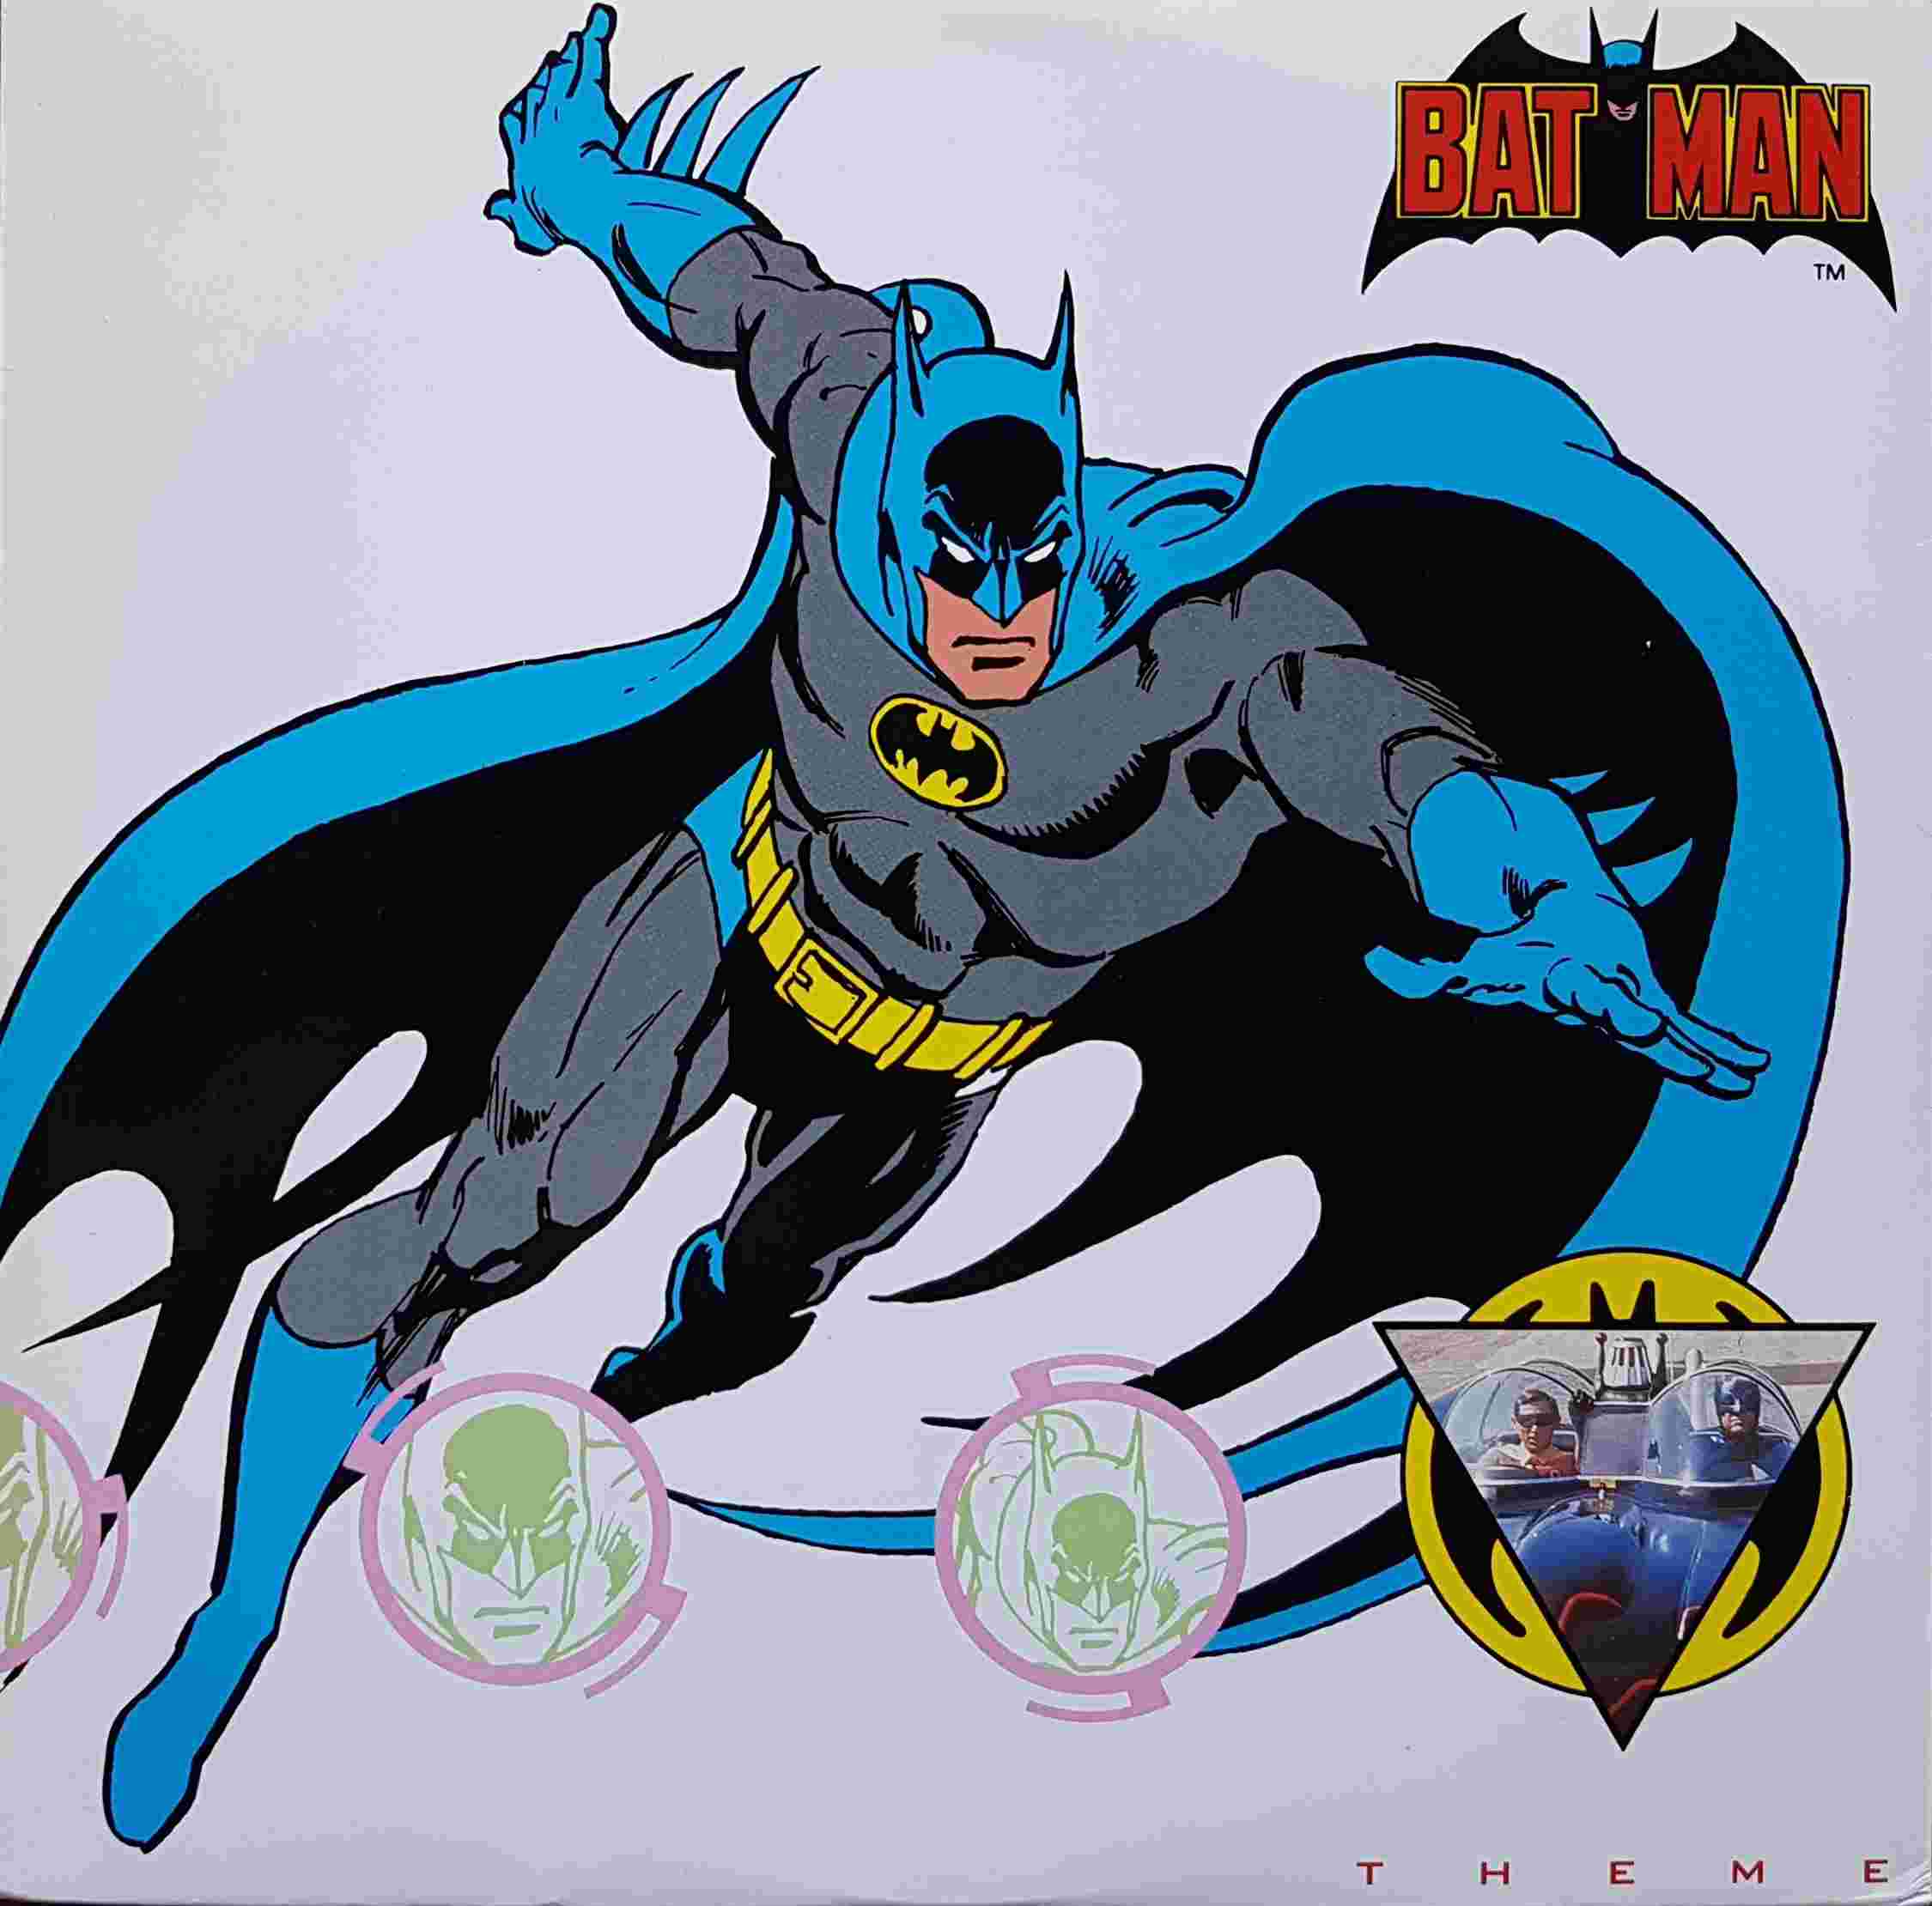 Picture of Batman by artist Neal Hefti from ITV, Channel 4 and Channel 5 12inches library